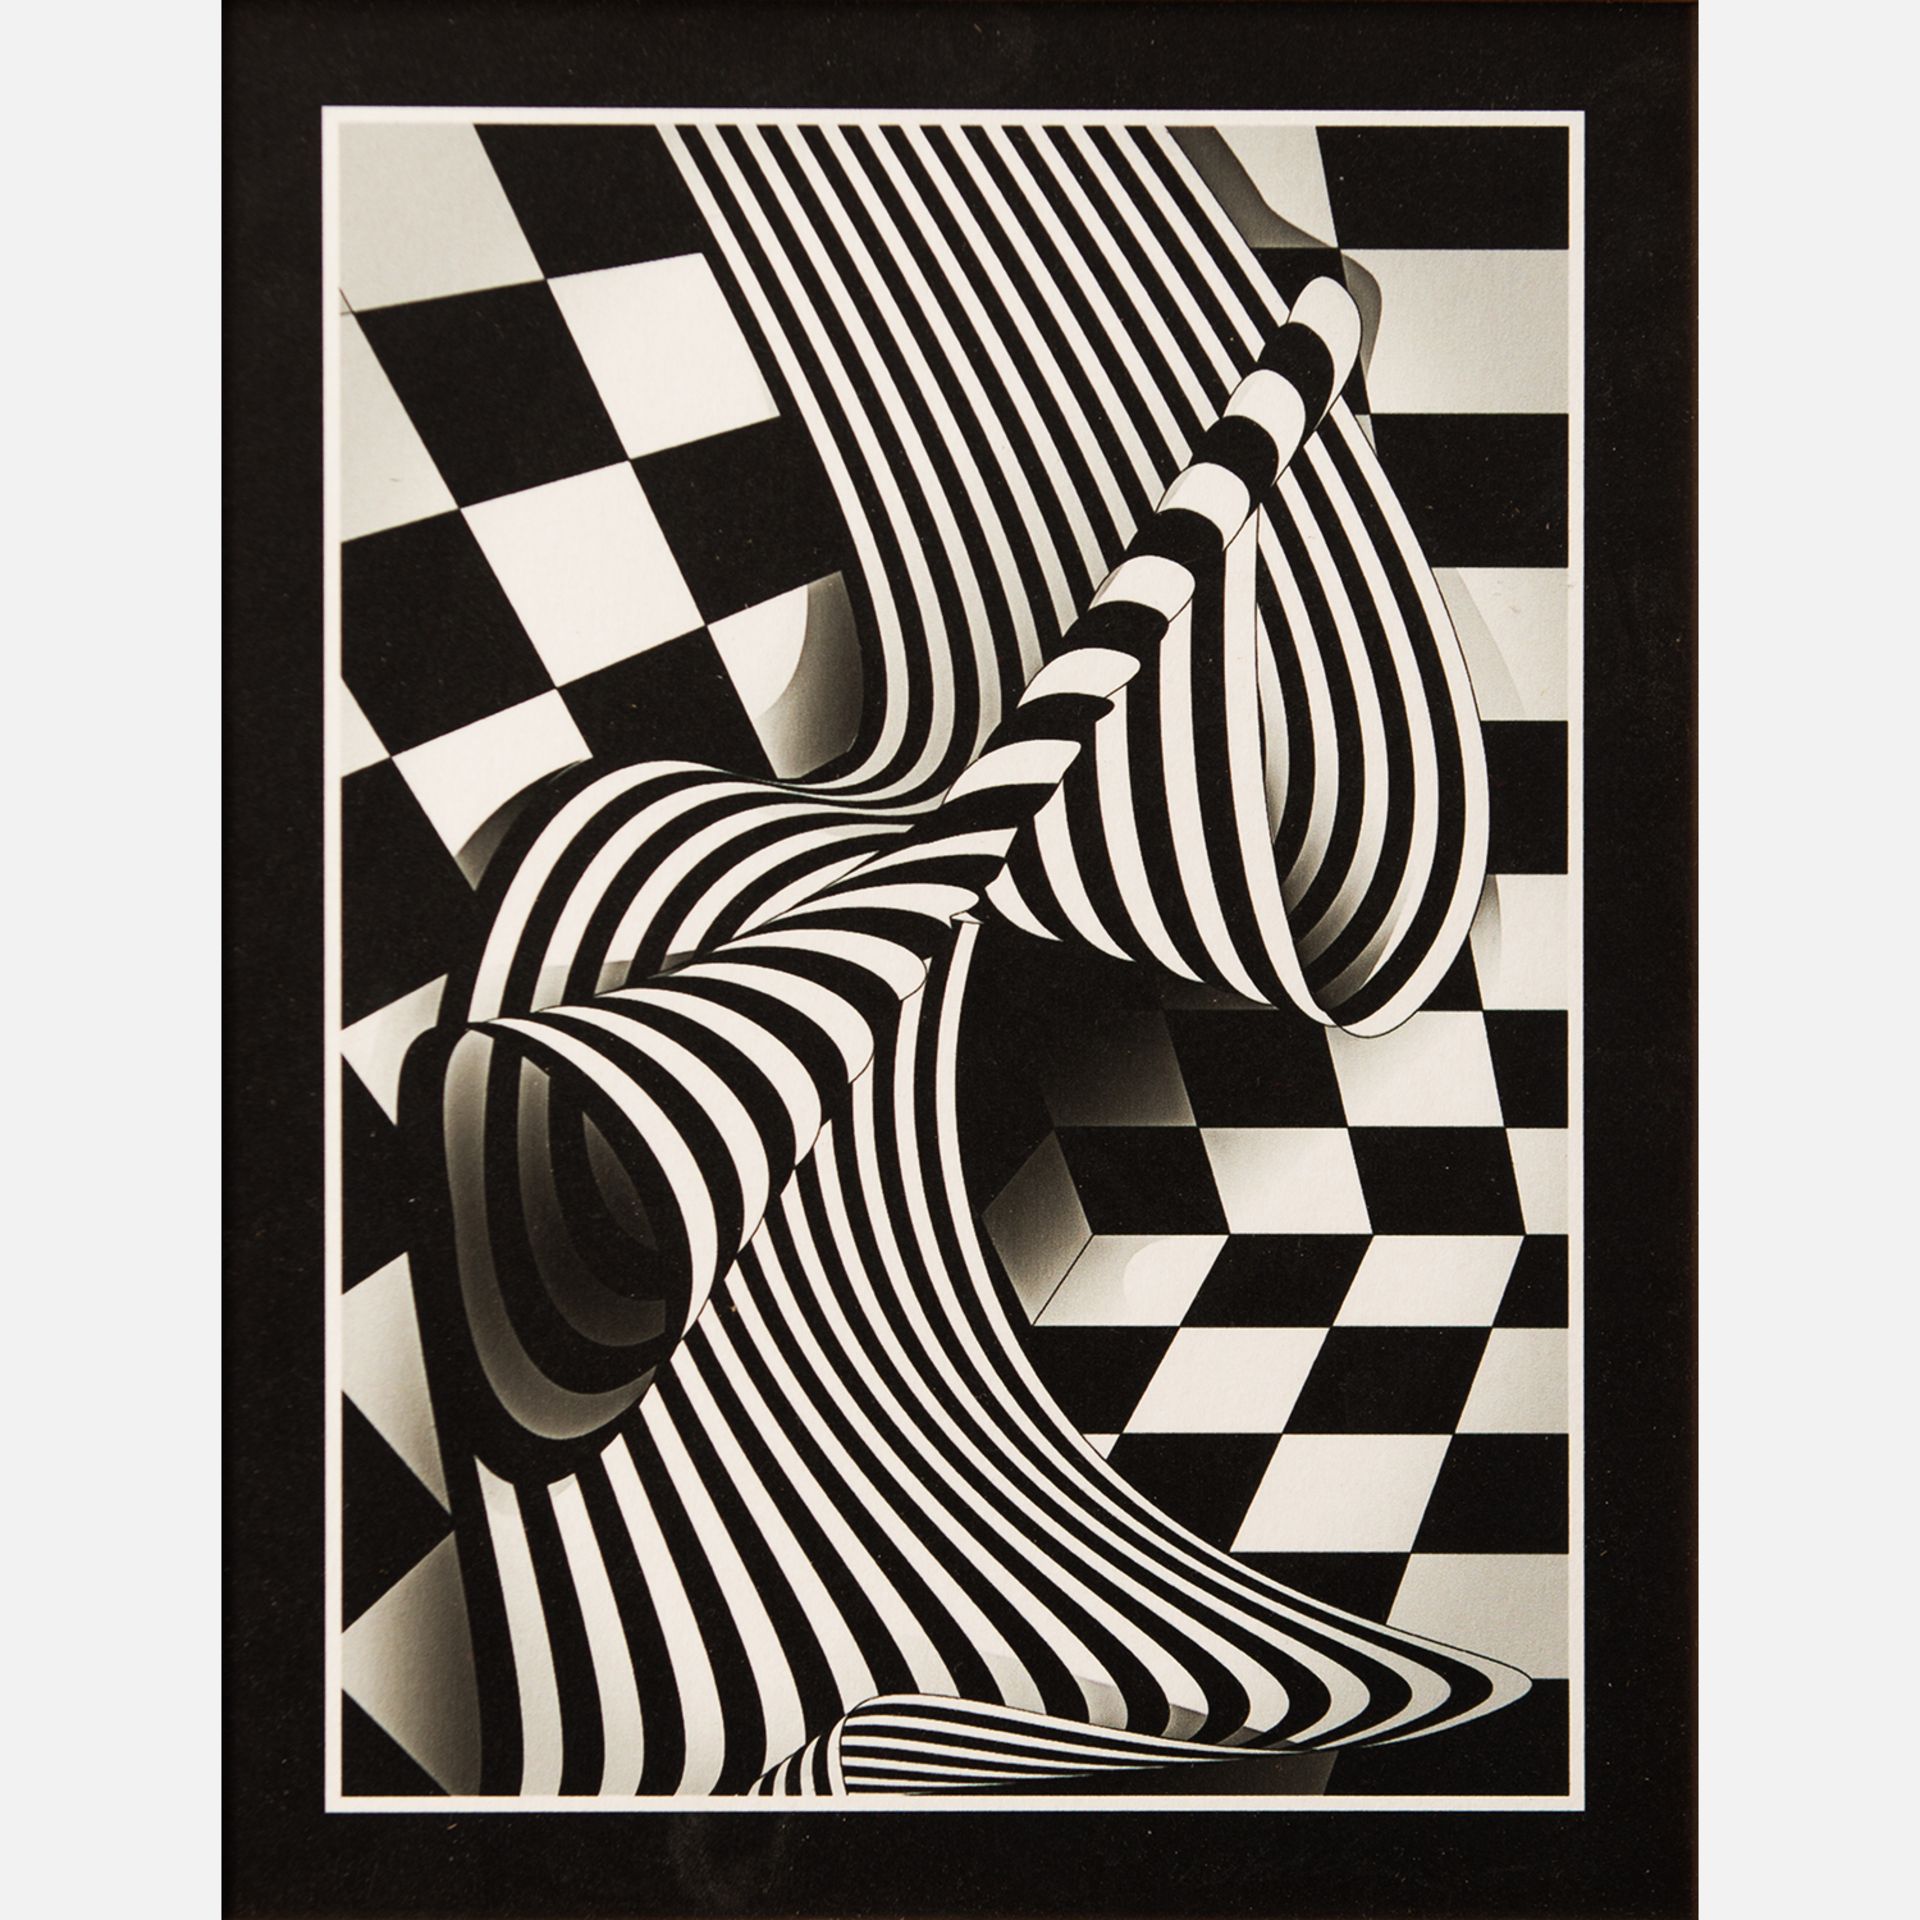 Victor Vasarely (1906-1997) – graphic - Image 2 of 3